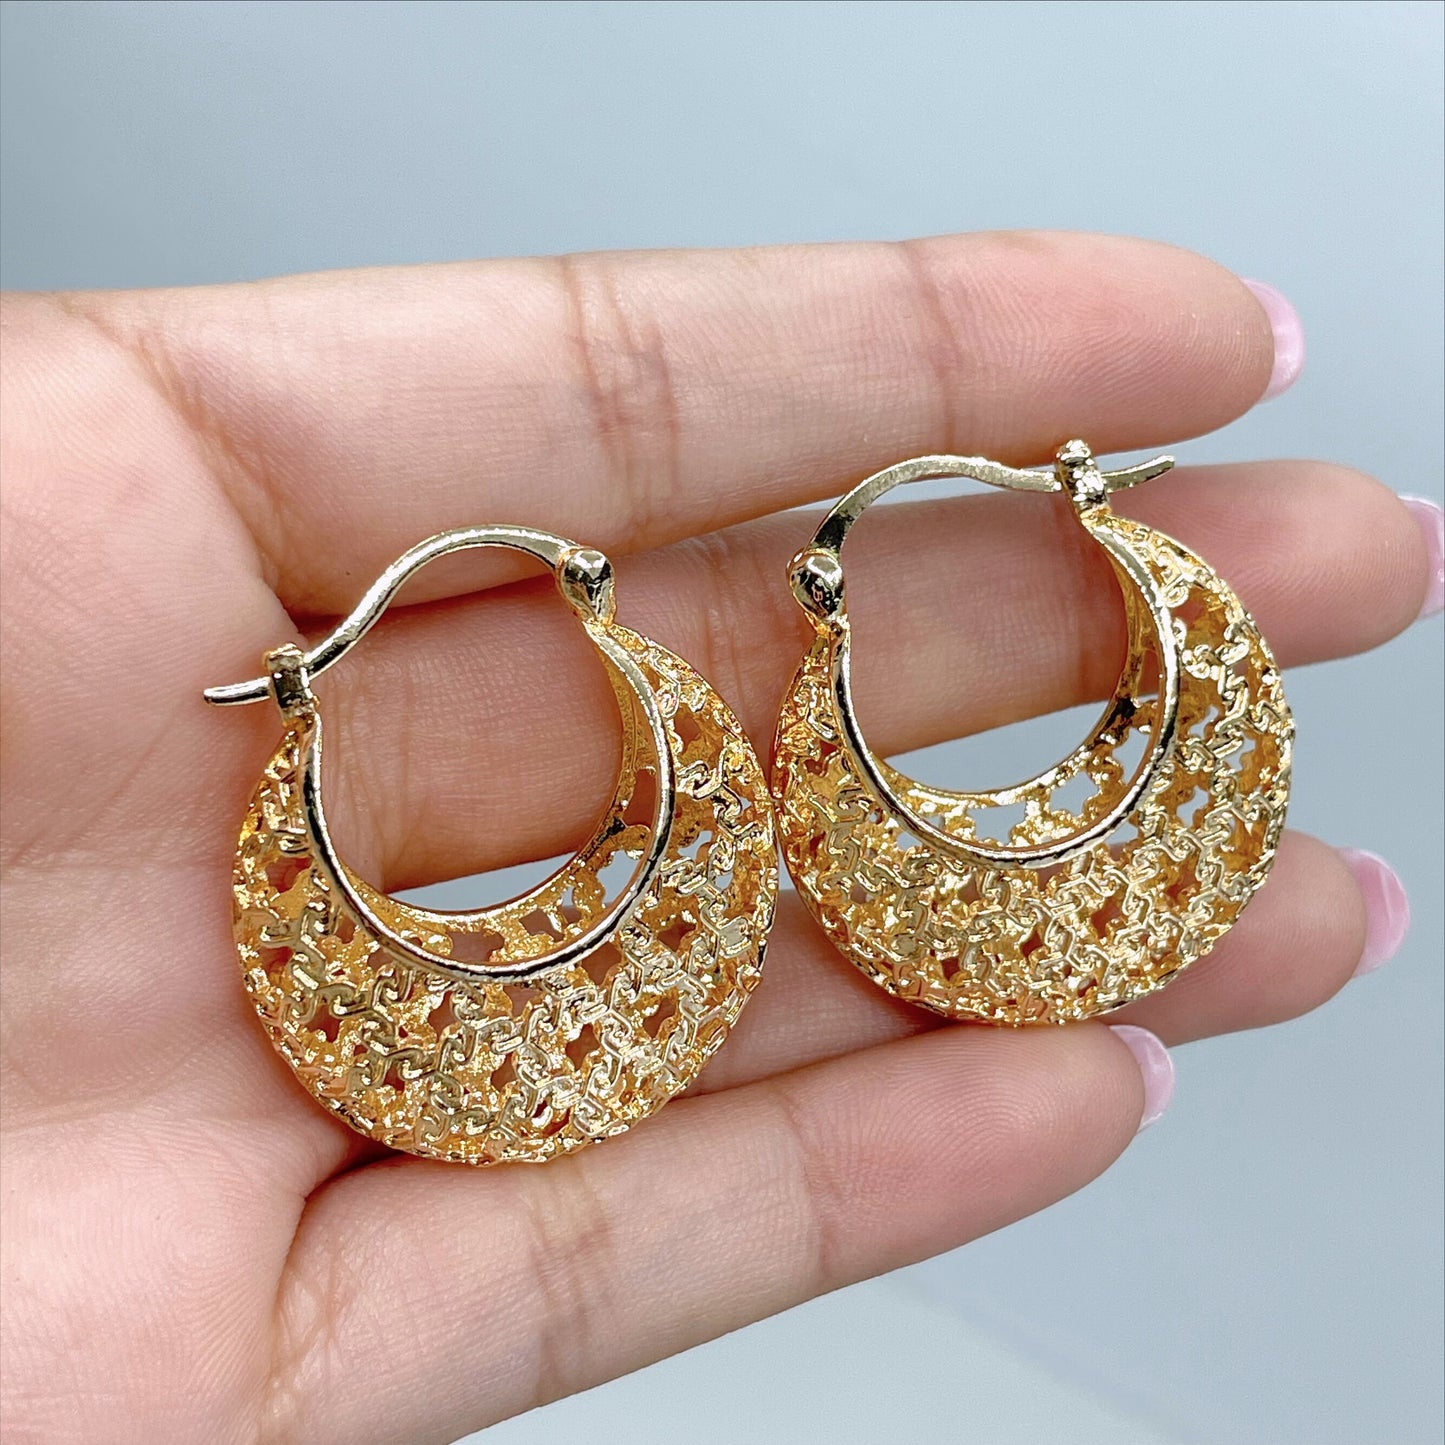 18k Gold Filled  29mm Texturized Cutout Basket Design Earrings, 11mm Thickness, Wholesale Jewelry Making Supplies